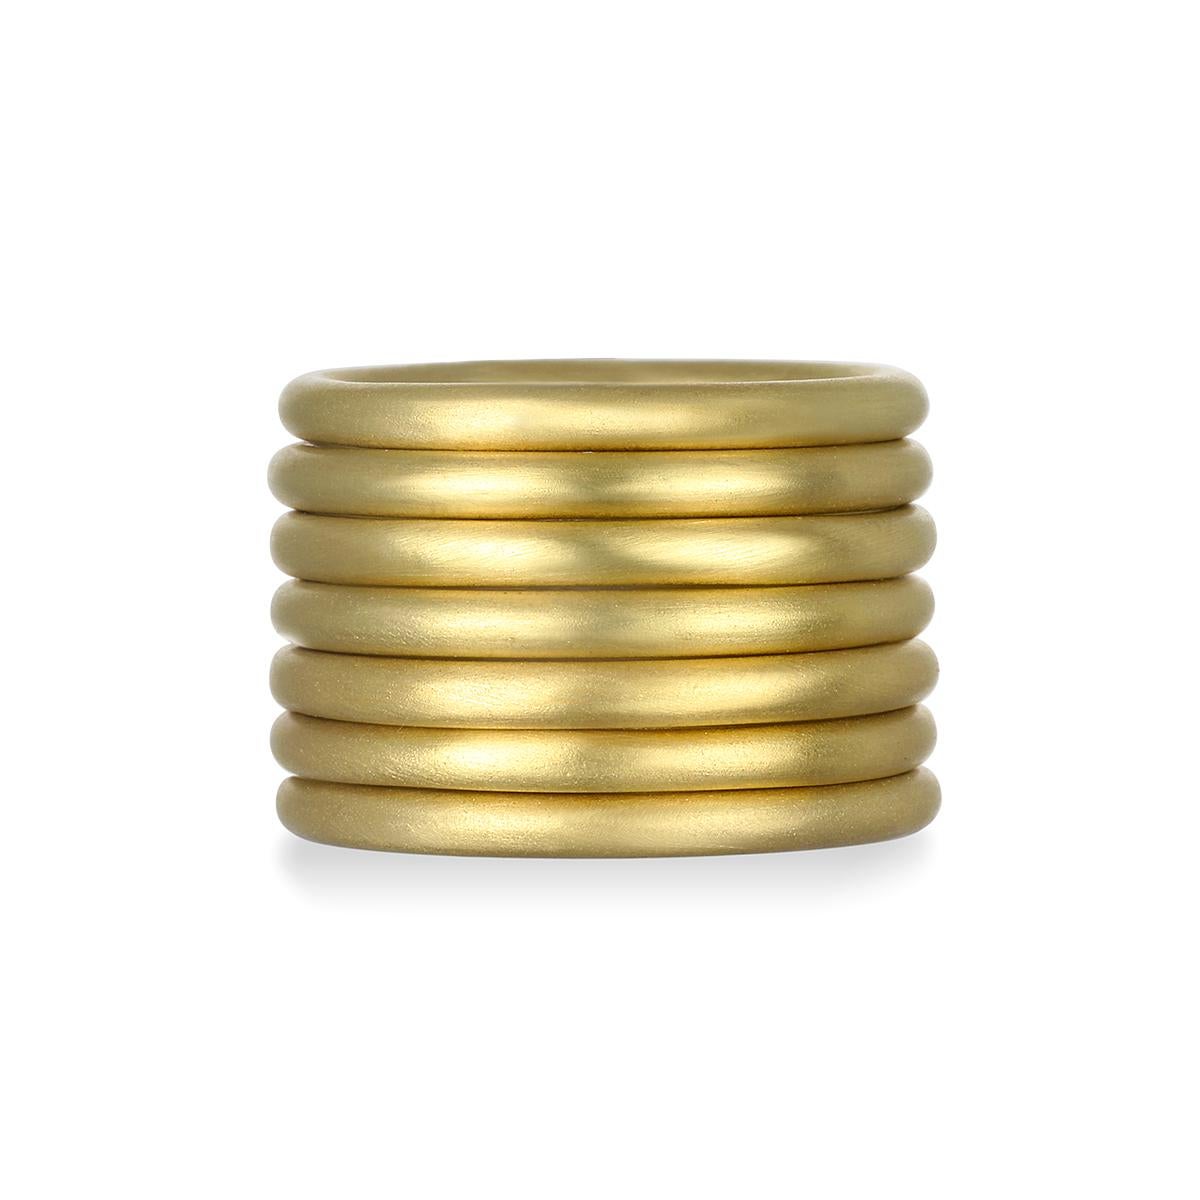 Handmade in 18 Karat Gold with a matte finish, Faye Kim's 2mm round band is classic and versatile and a perennial favorite. Wear alone or stack to create your own unique style.

Size 7 (can be resized, please inquire for more info)
Width 2mm 

Made